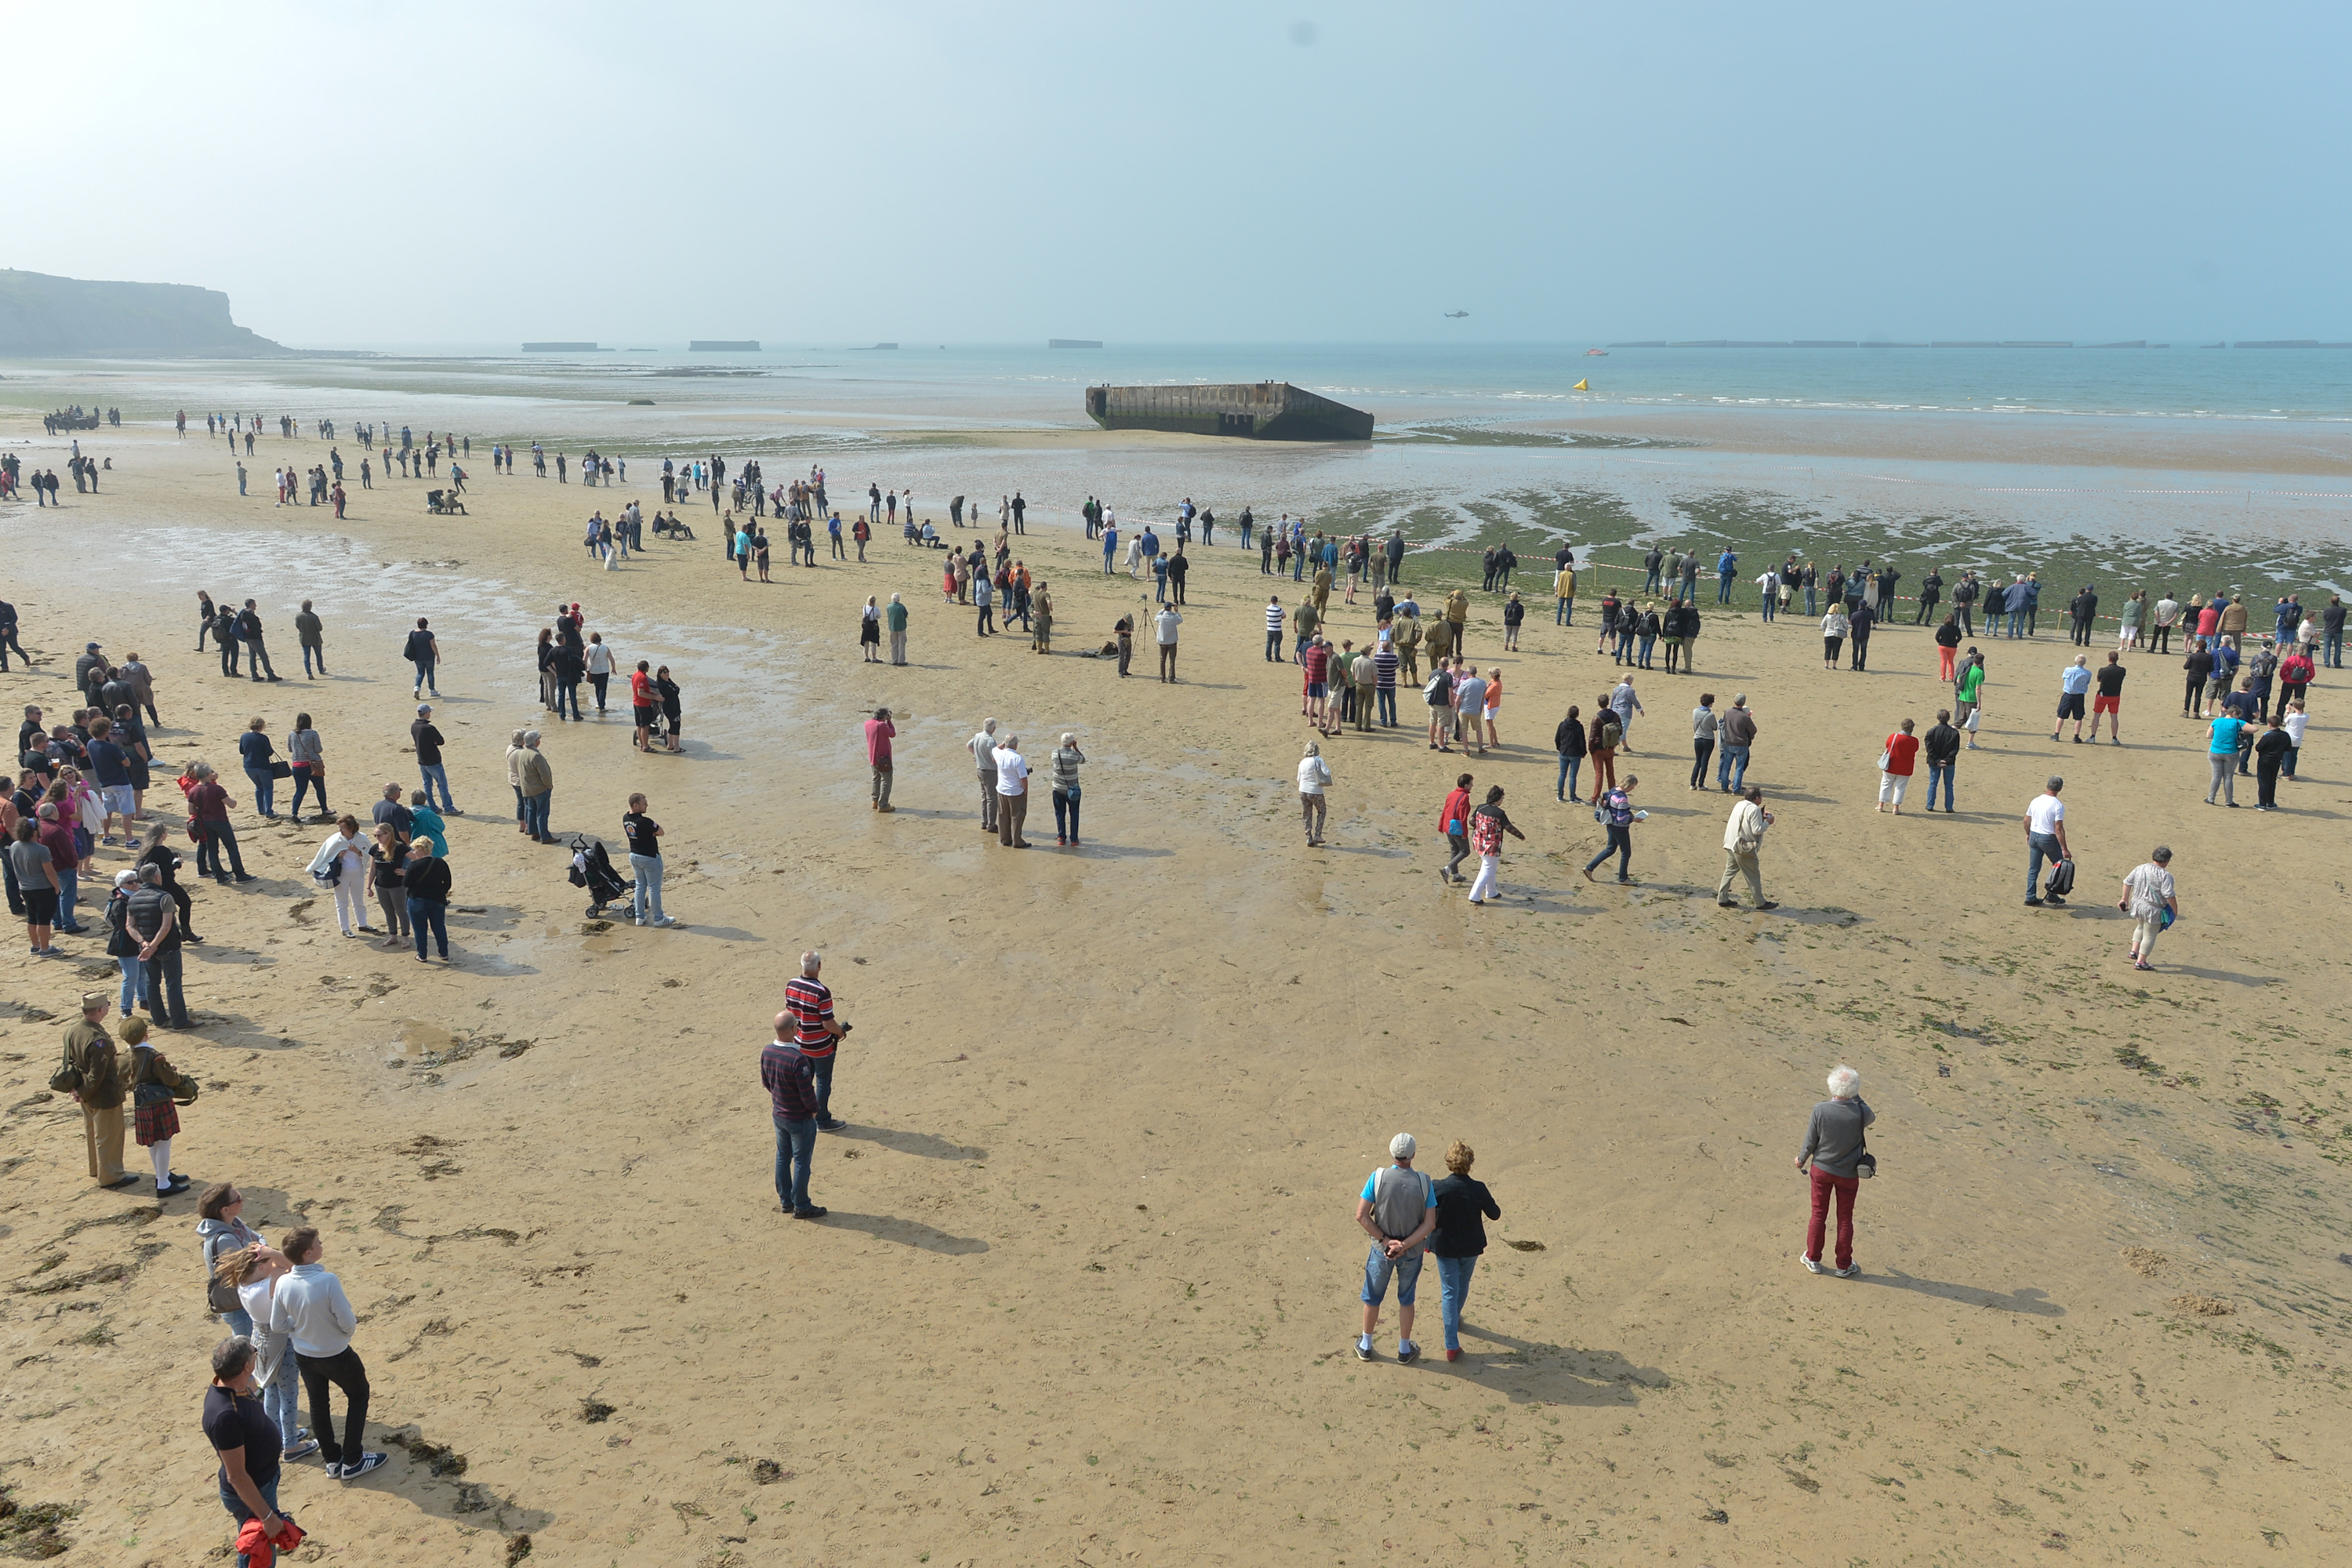 latest-fitness-fad-storming-normandy-beach-on-d-day.